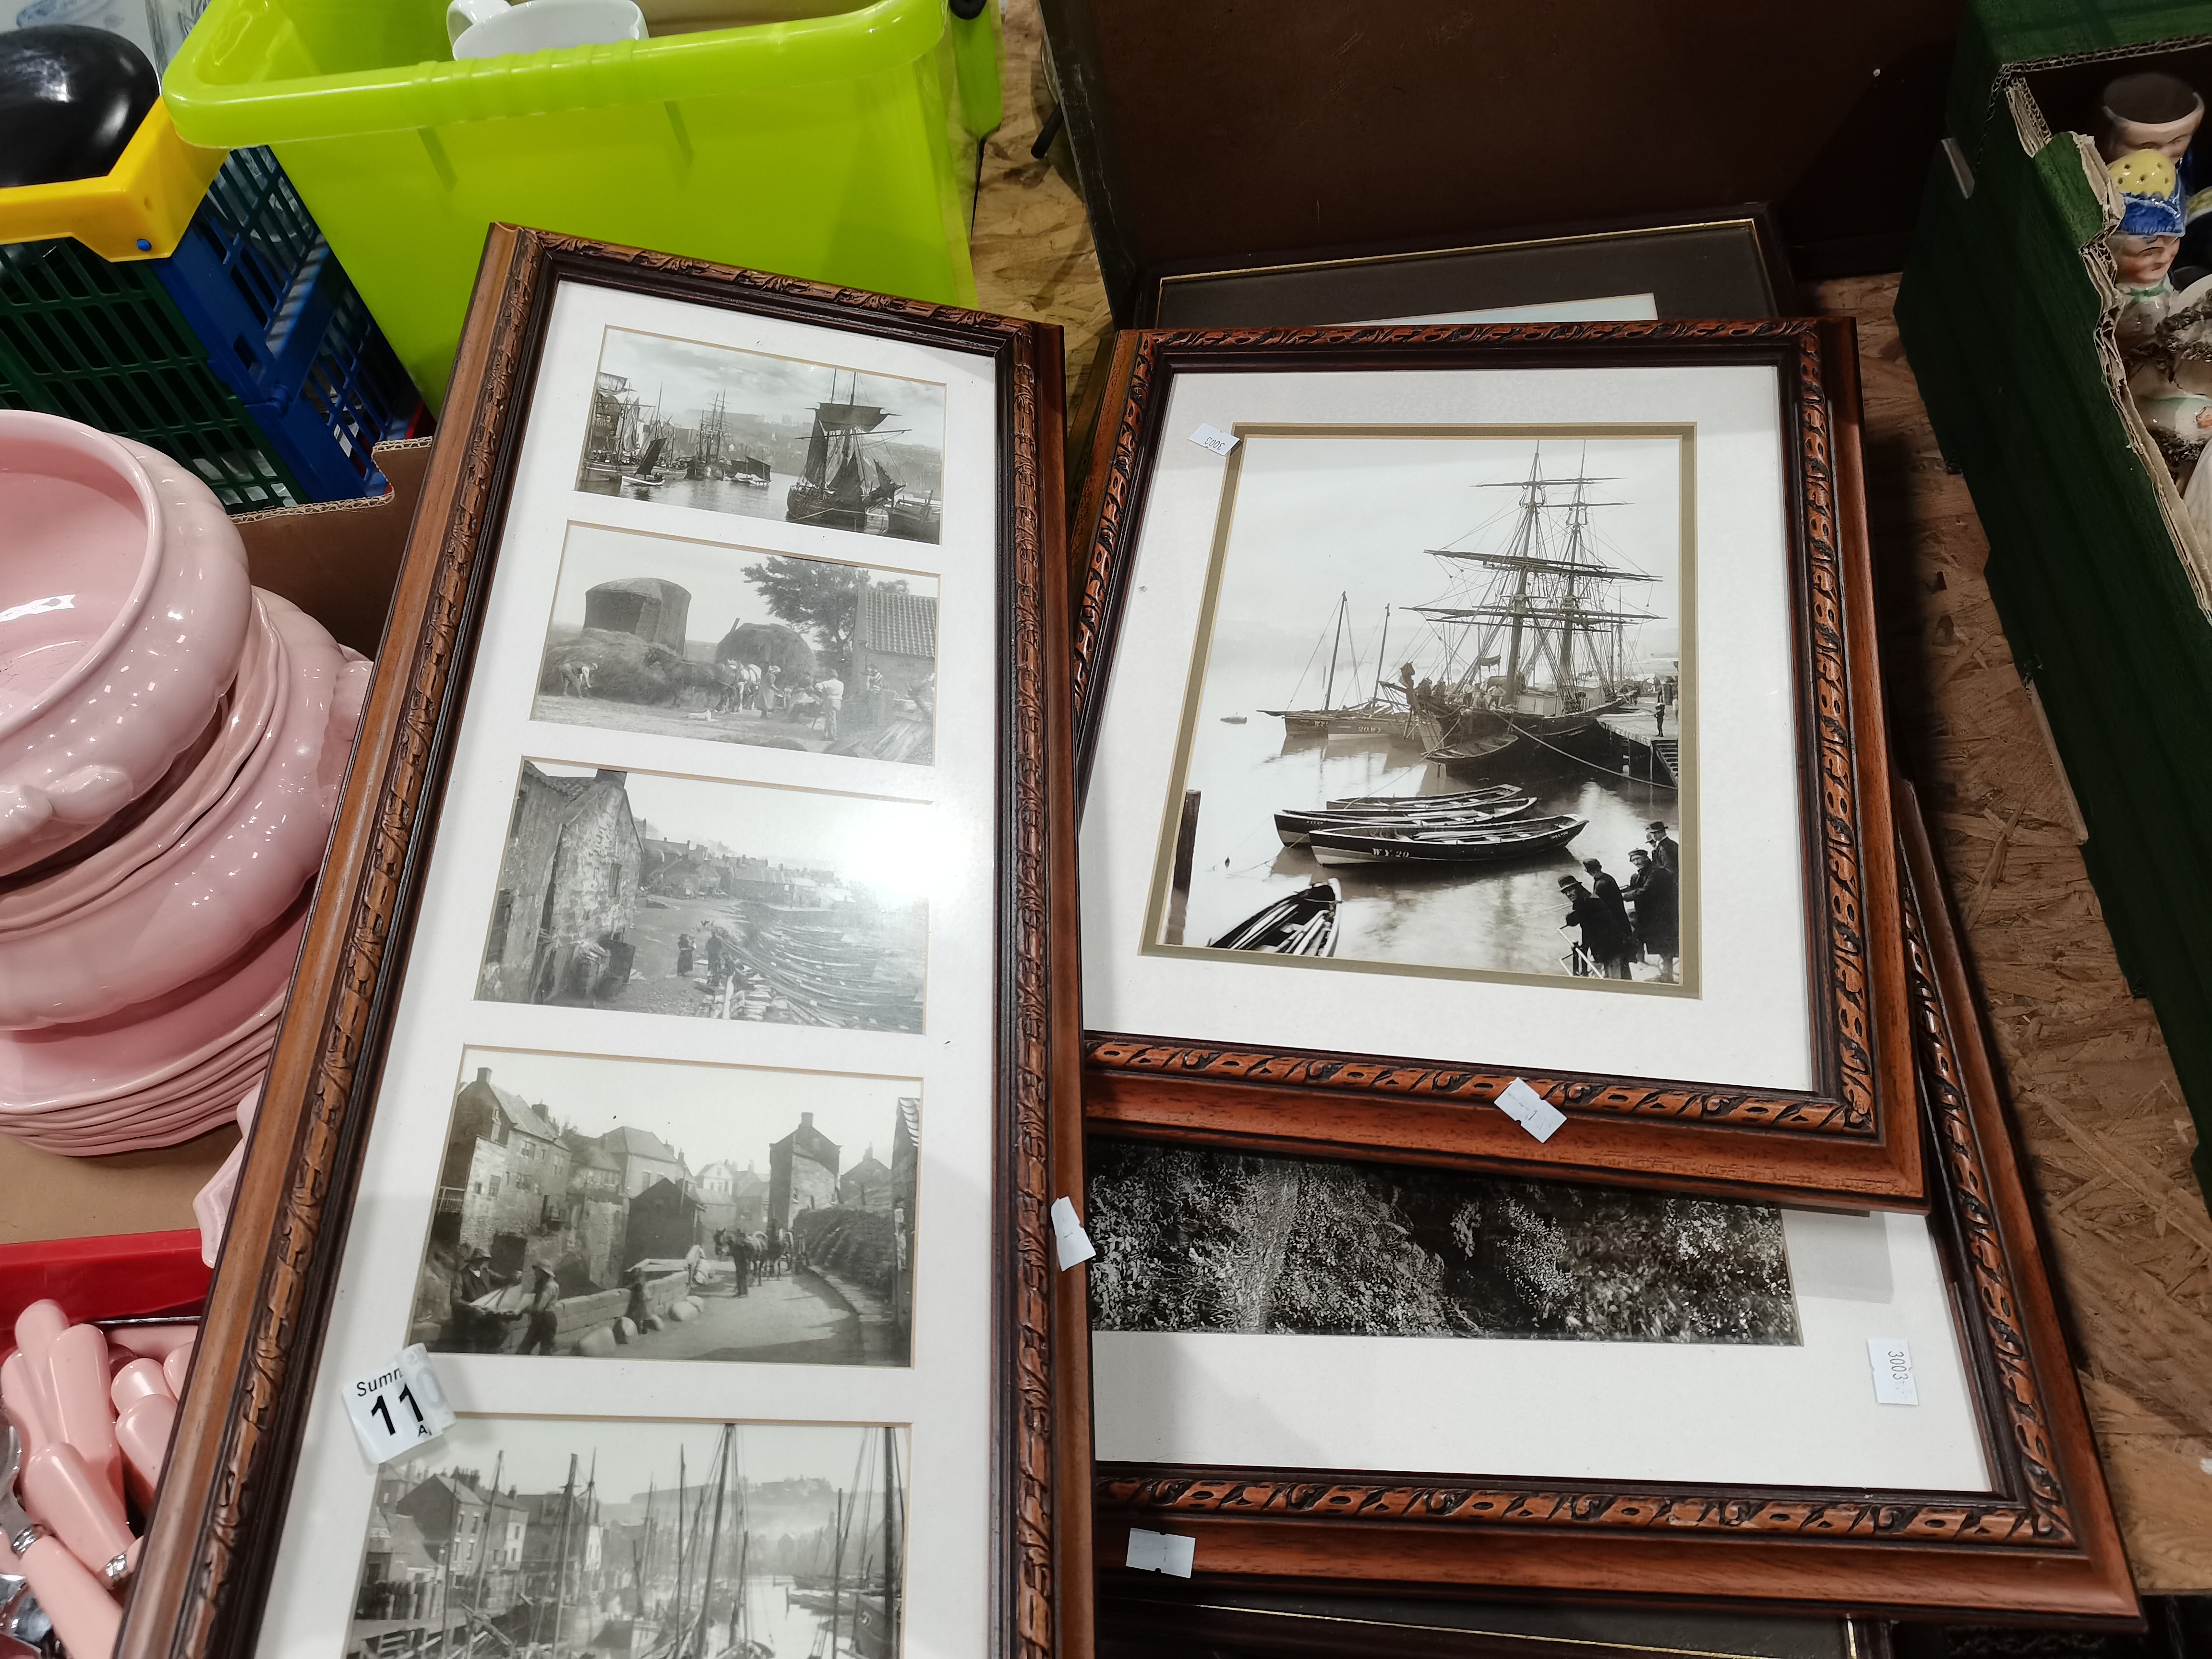 Framed Sutcliffe Prints of Whitby and coastal scenes